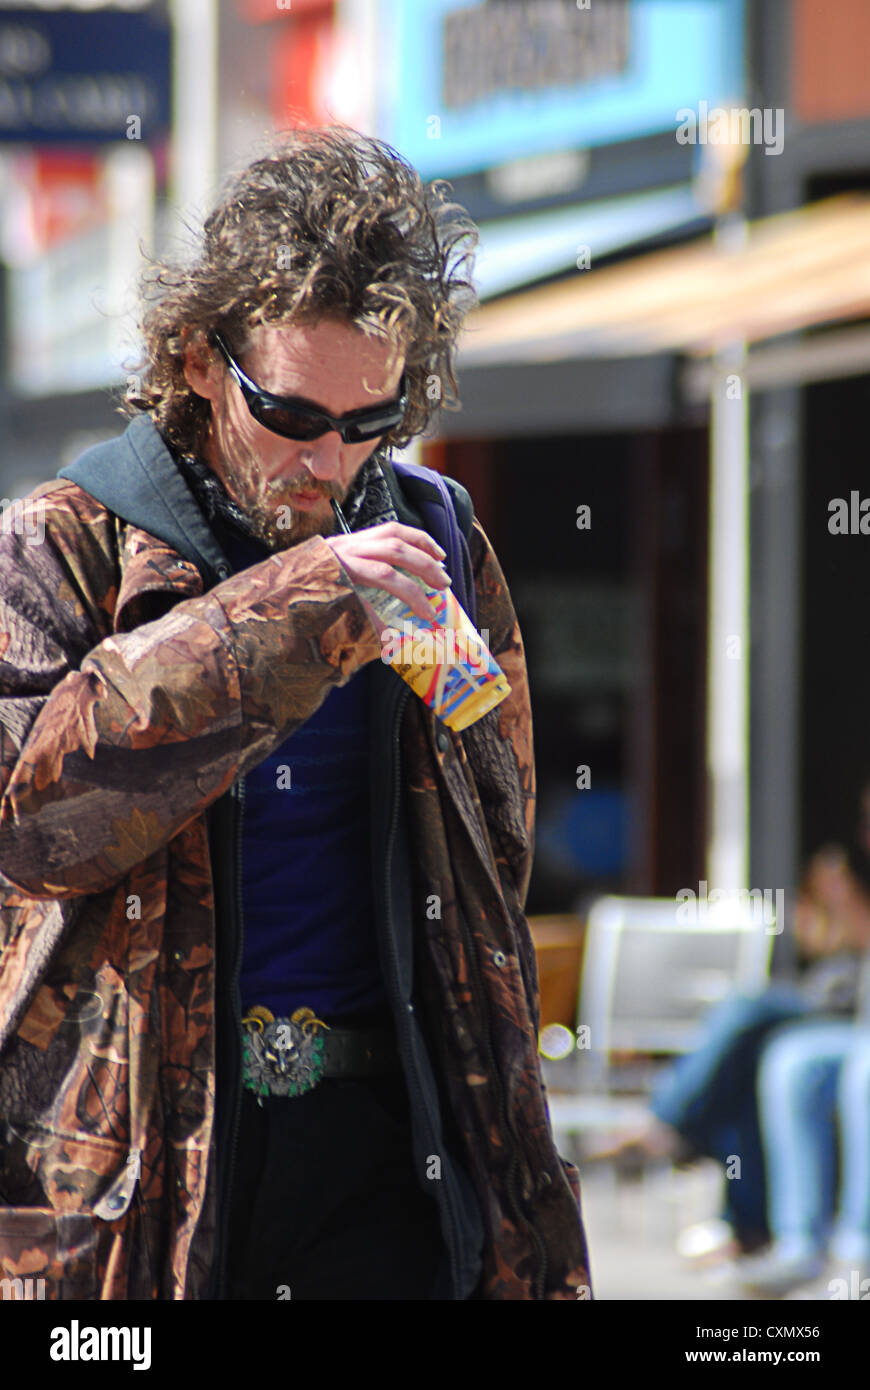 Scruffy man walking in the street with soft drink Stock Photo